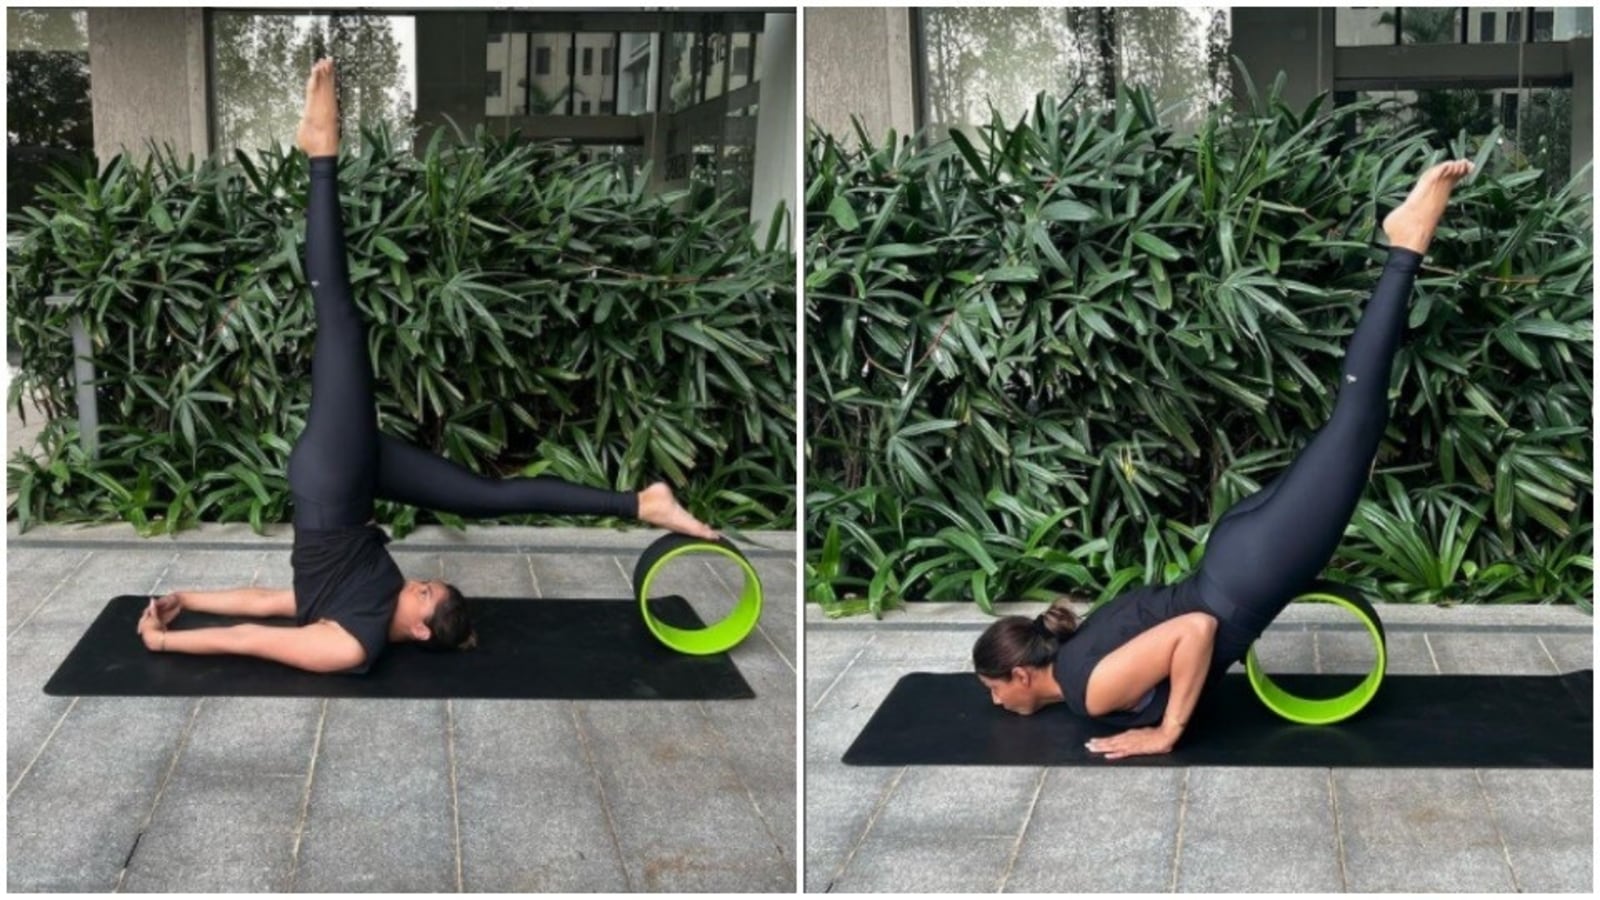 alia-bhatt-s-trainer-shares-yoga-asanas-that-can-be-done-better-with-yoga-wheel